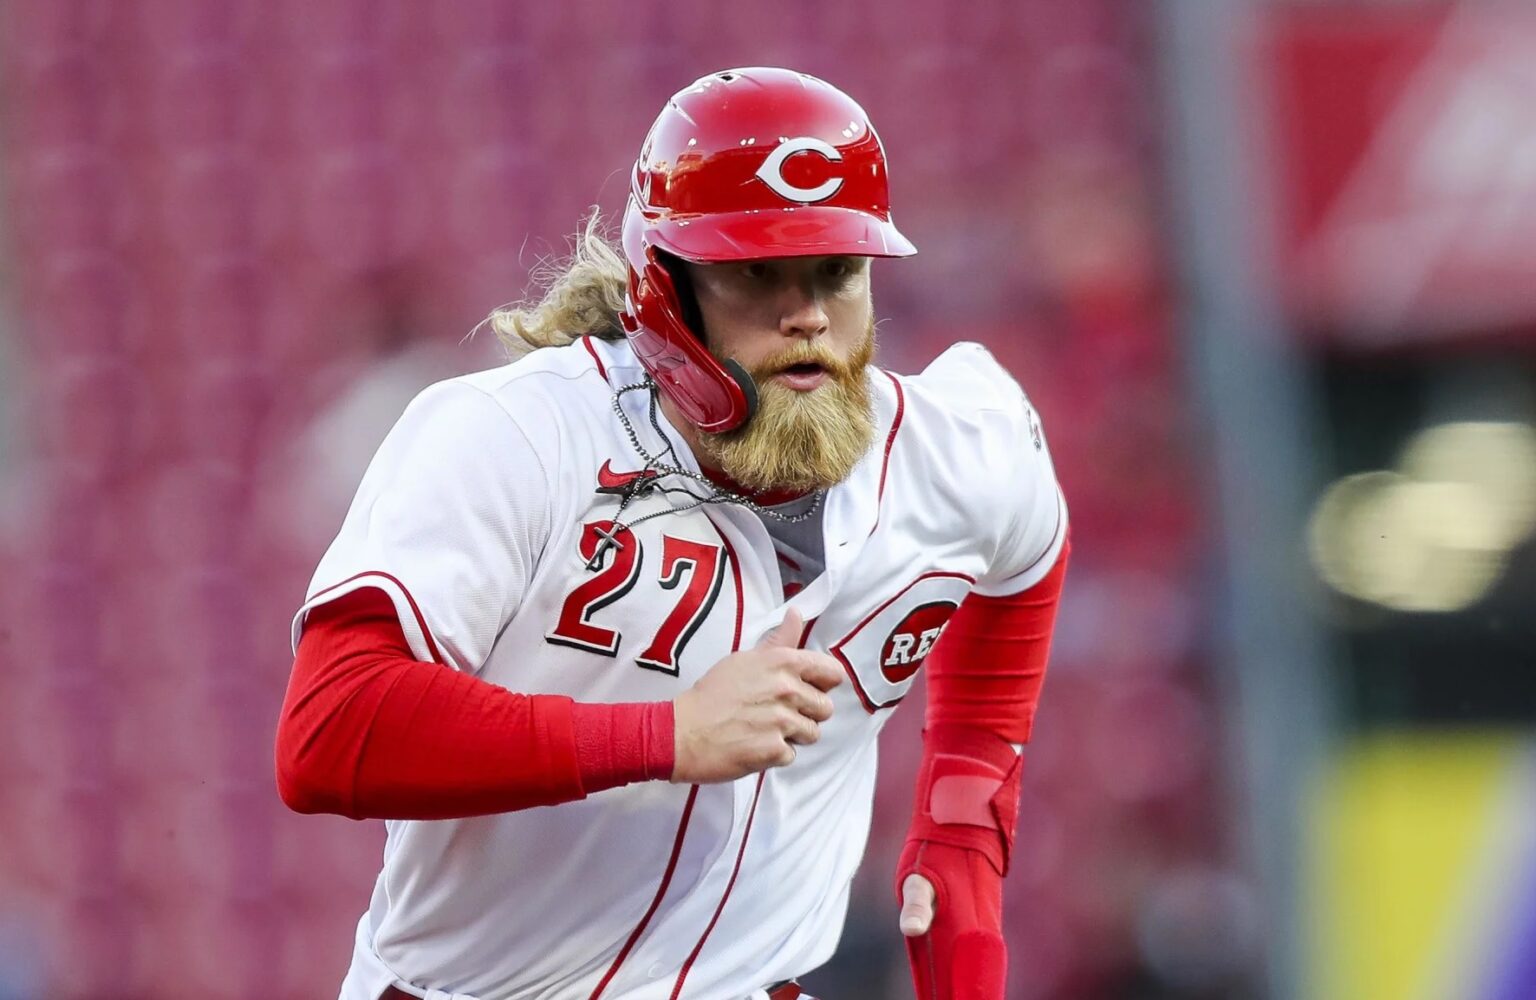 Jake Fraley is a player to watch in tonight's Cincinnati Reds vs. Baltimore Orioles Expert Pick.